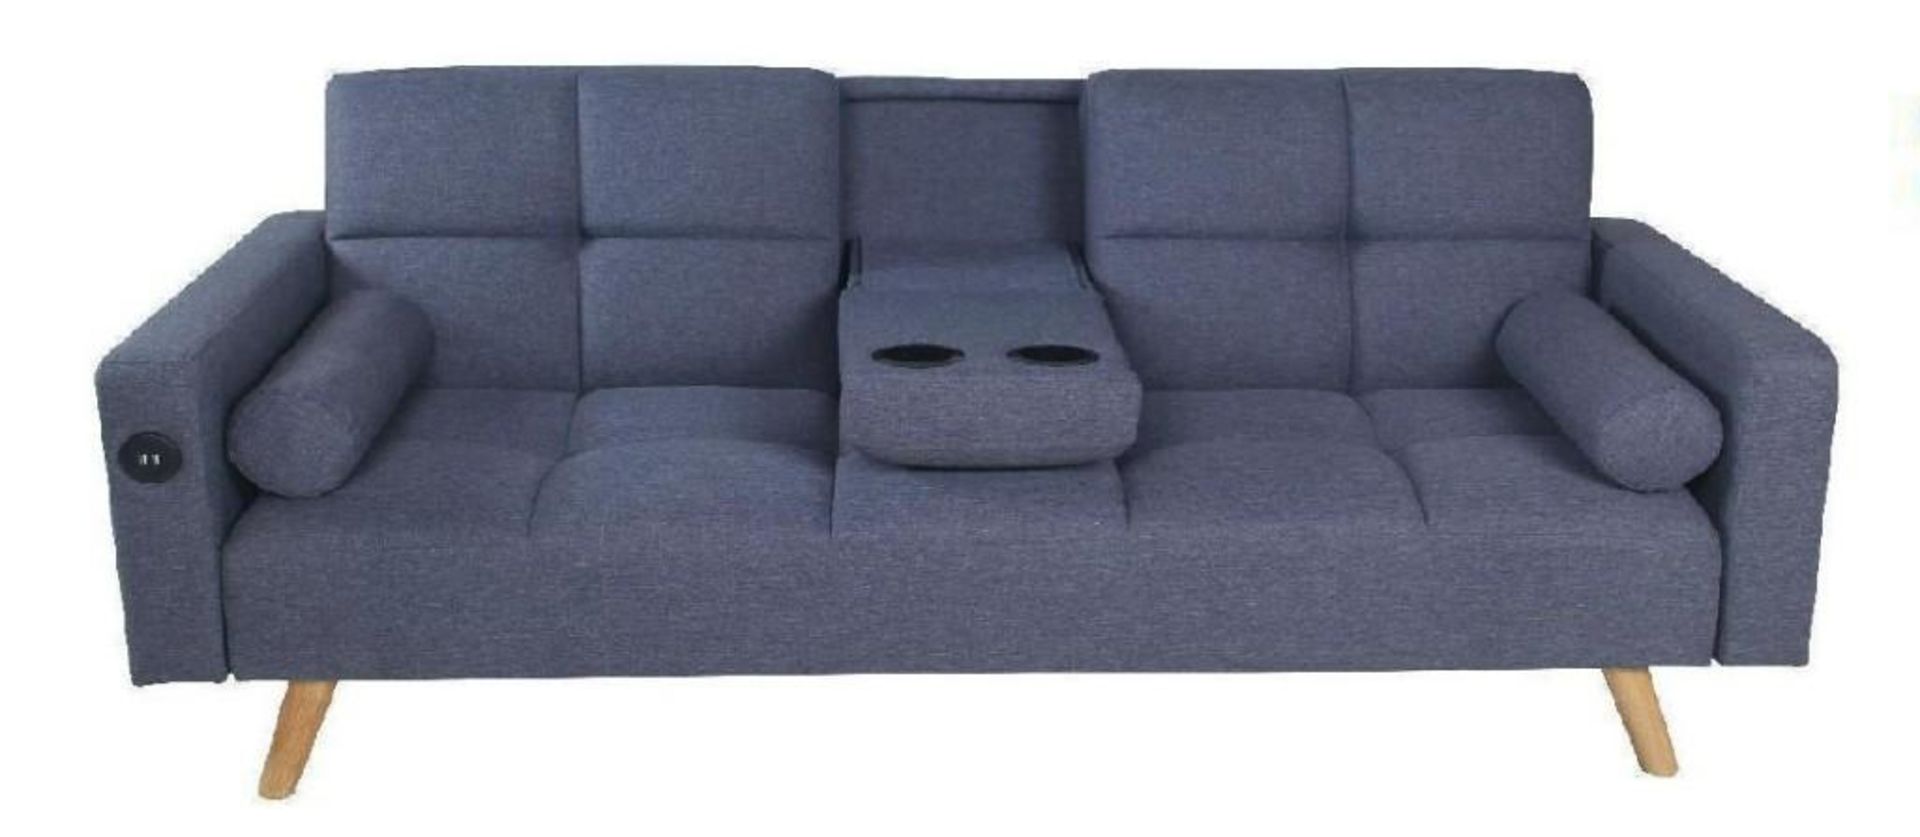 Brand new Boxed 2 Seater Clic Clac USB Sofa Bed - Image 4 of 10